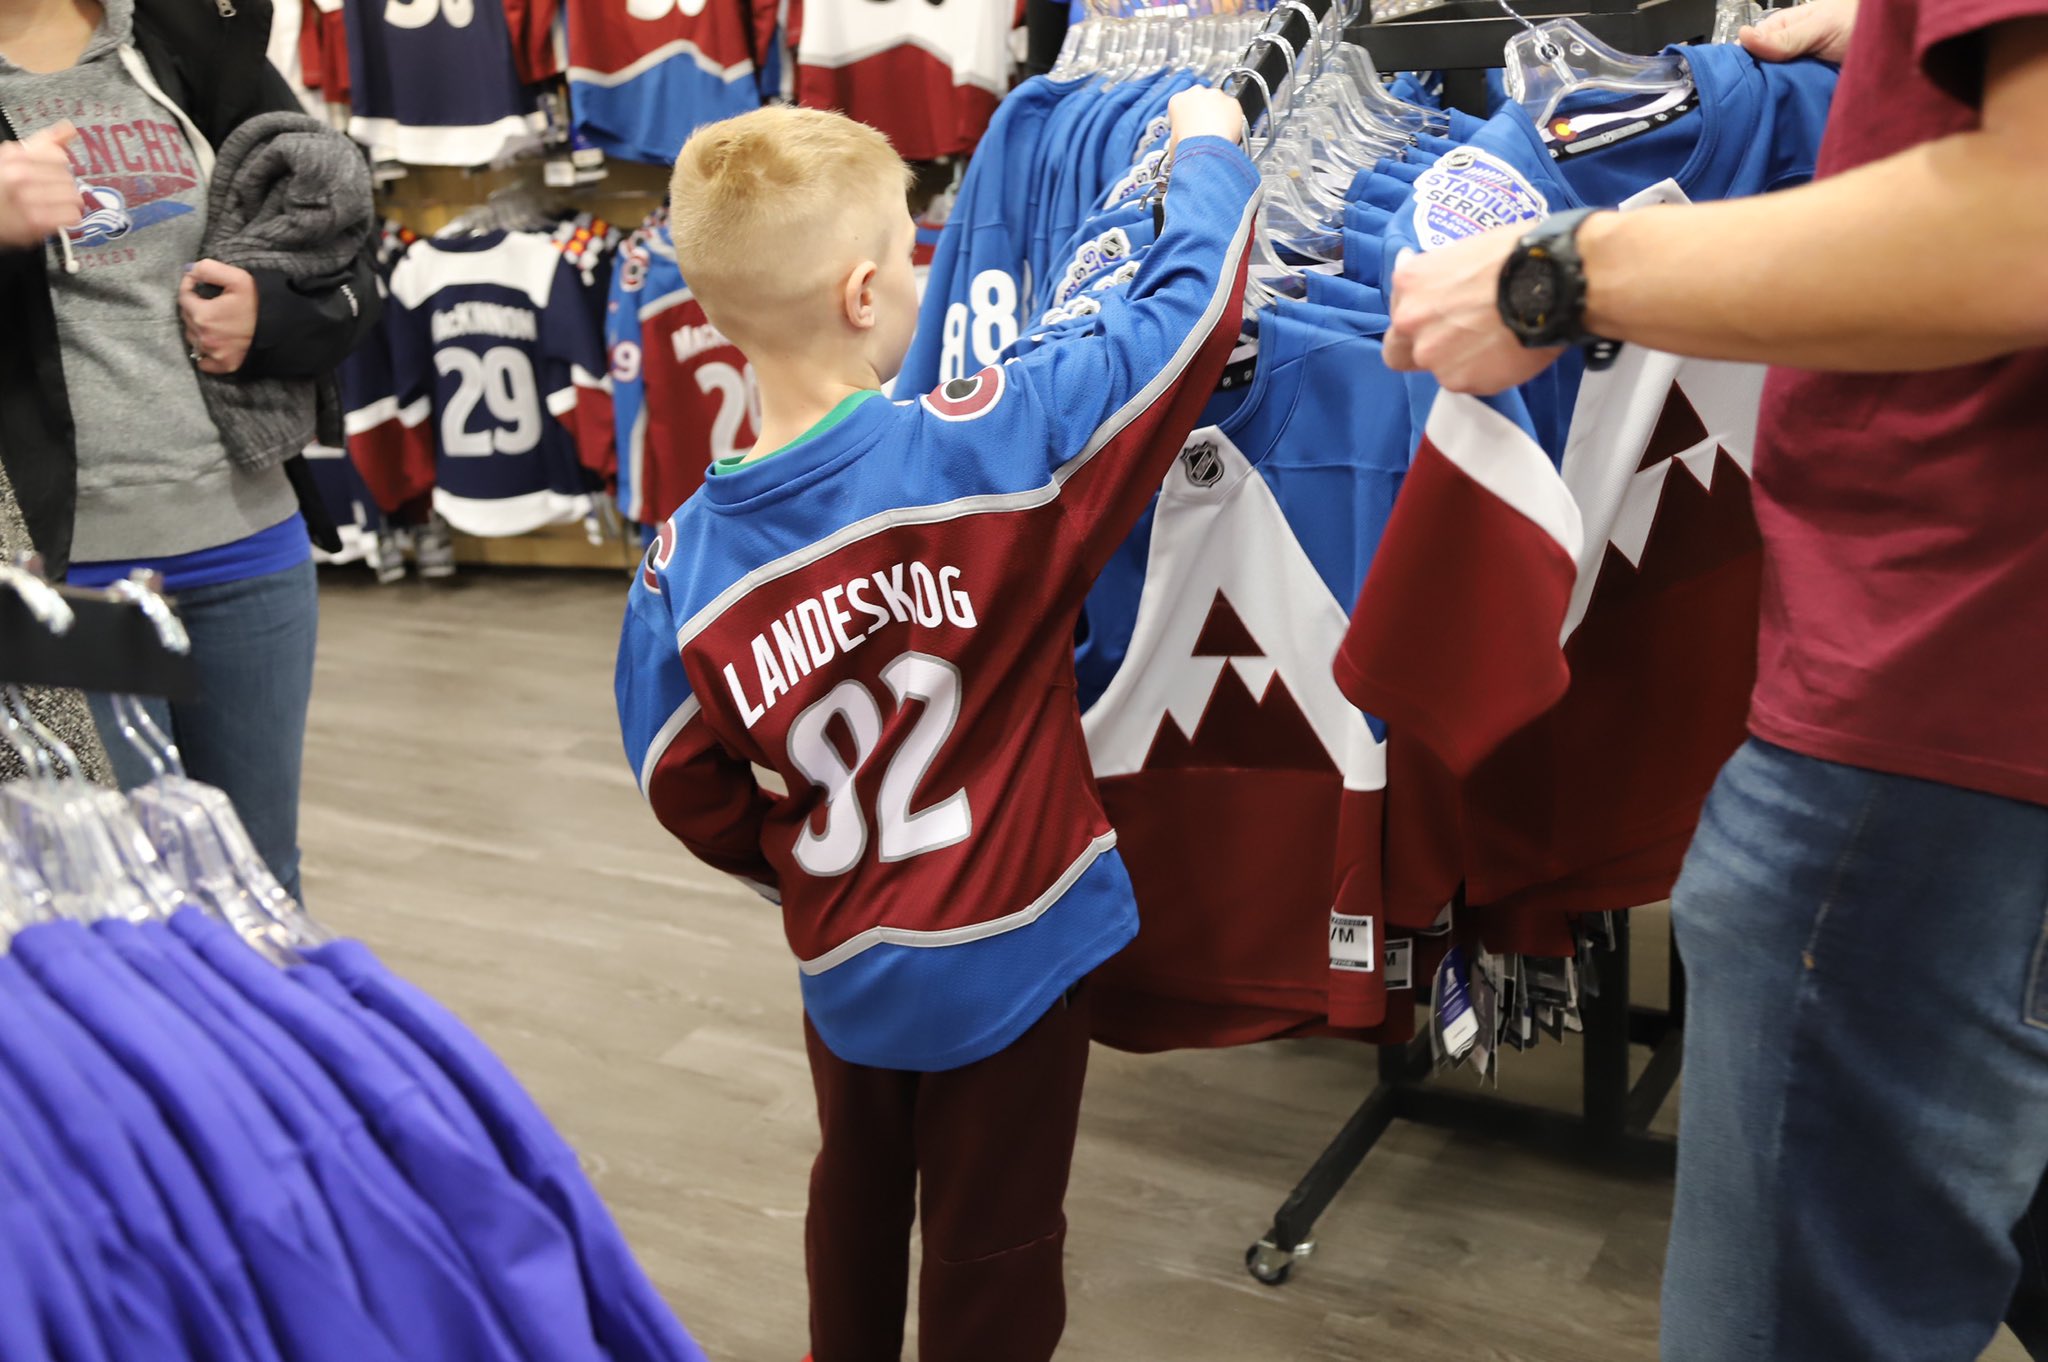 Colorado Avalanche on X: Altitude Authentics is selling the #Avs'  #HockeyFightsCancee jersey today, while supplies last.   / X